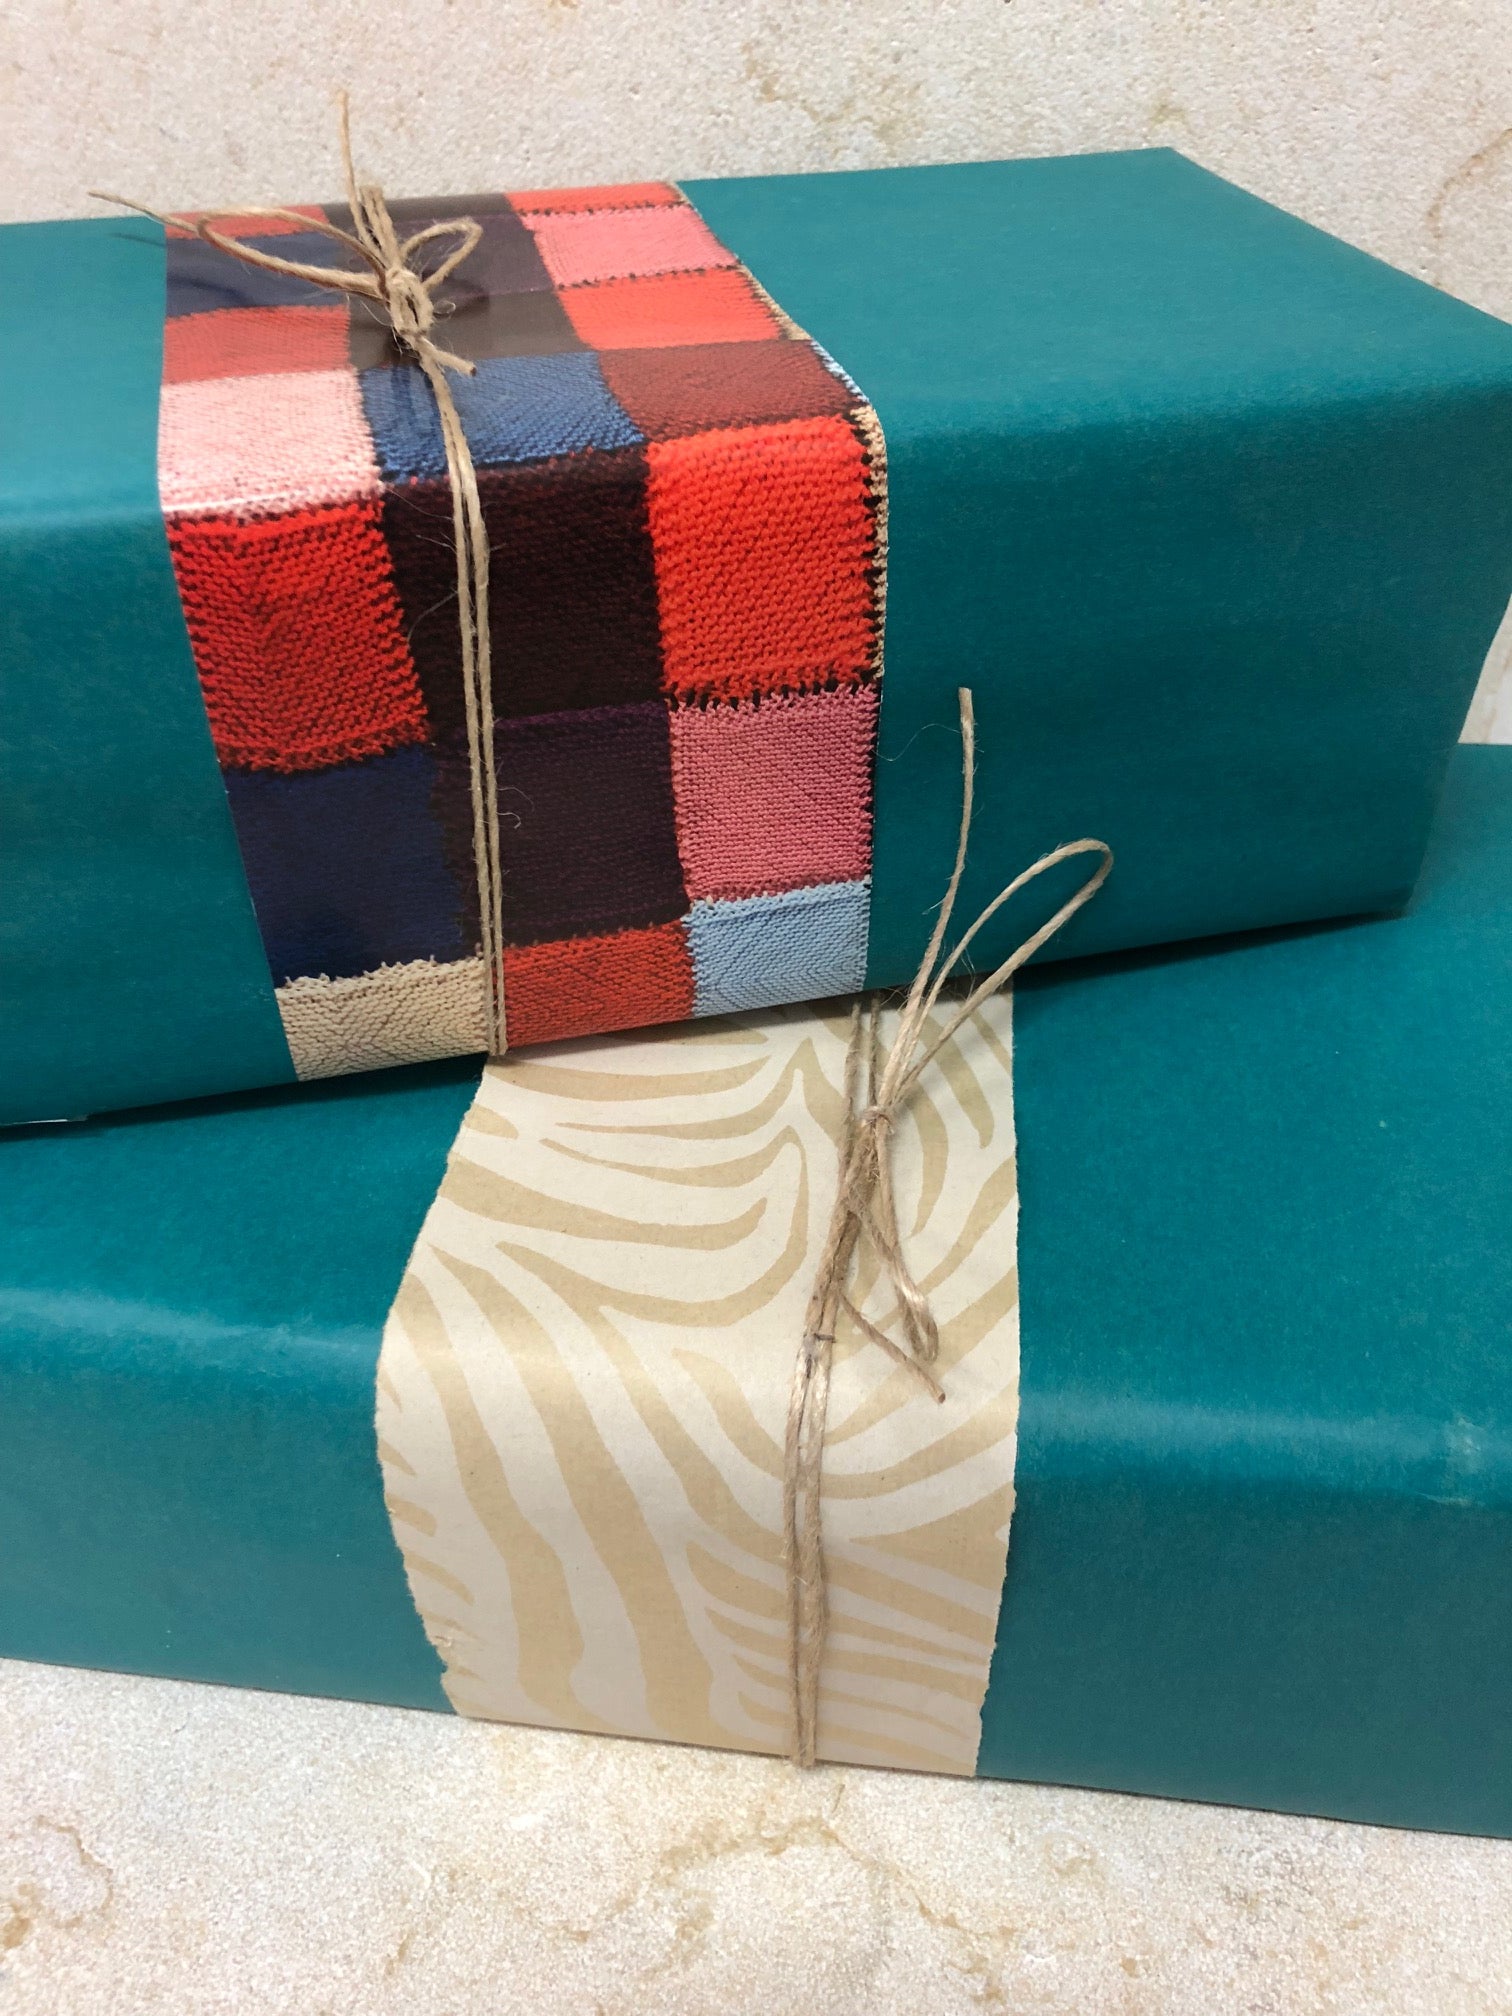 Online store gift wrapping service